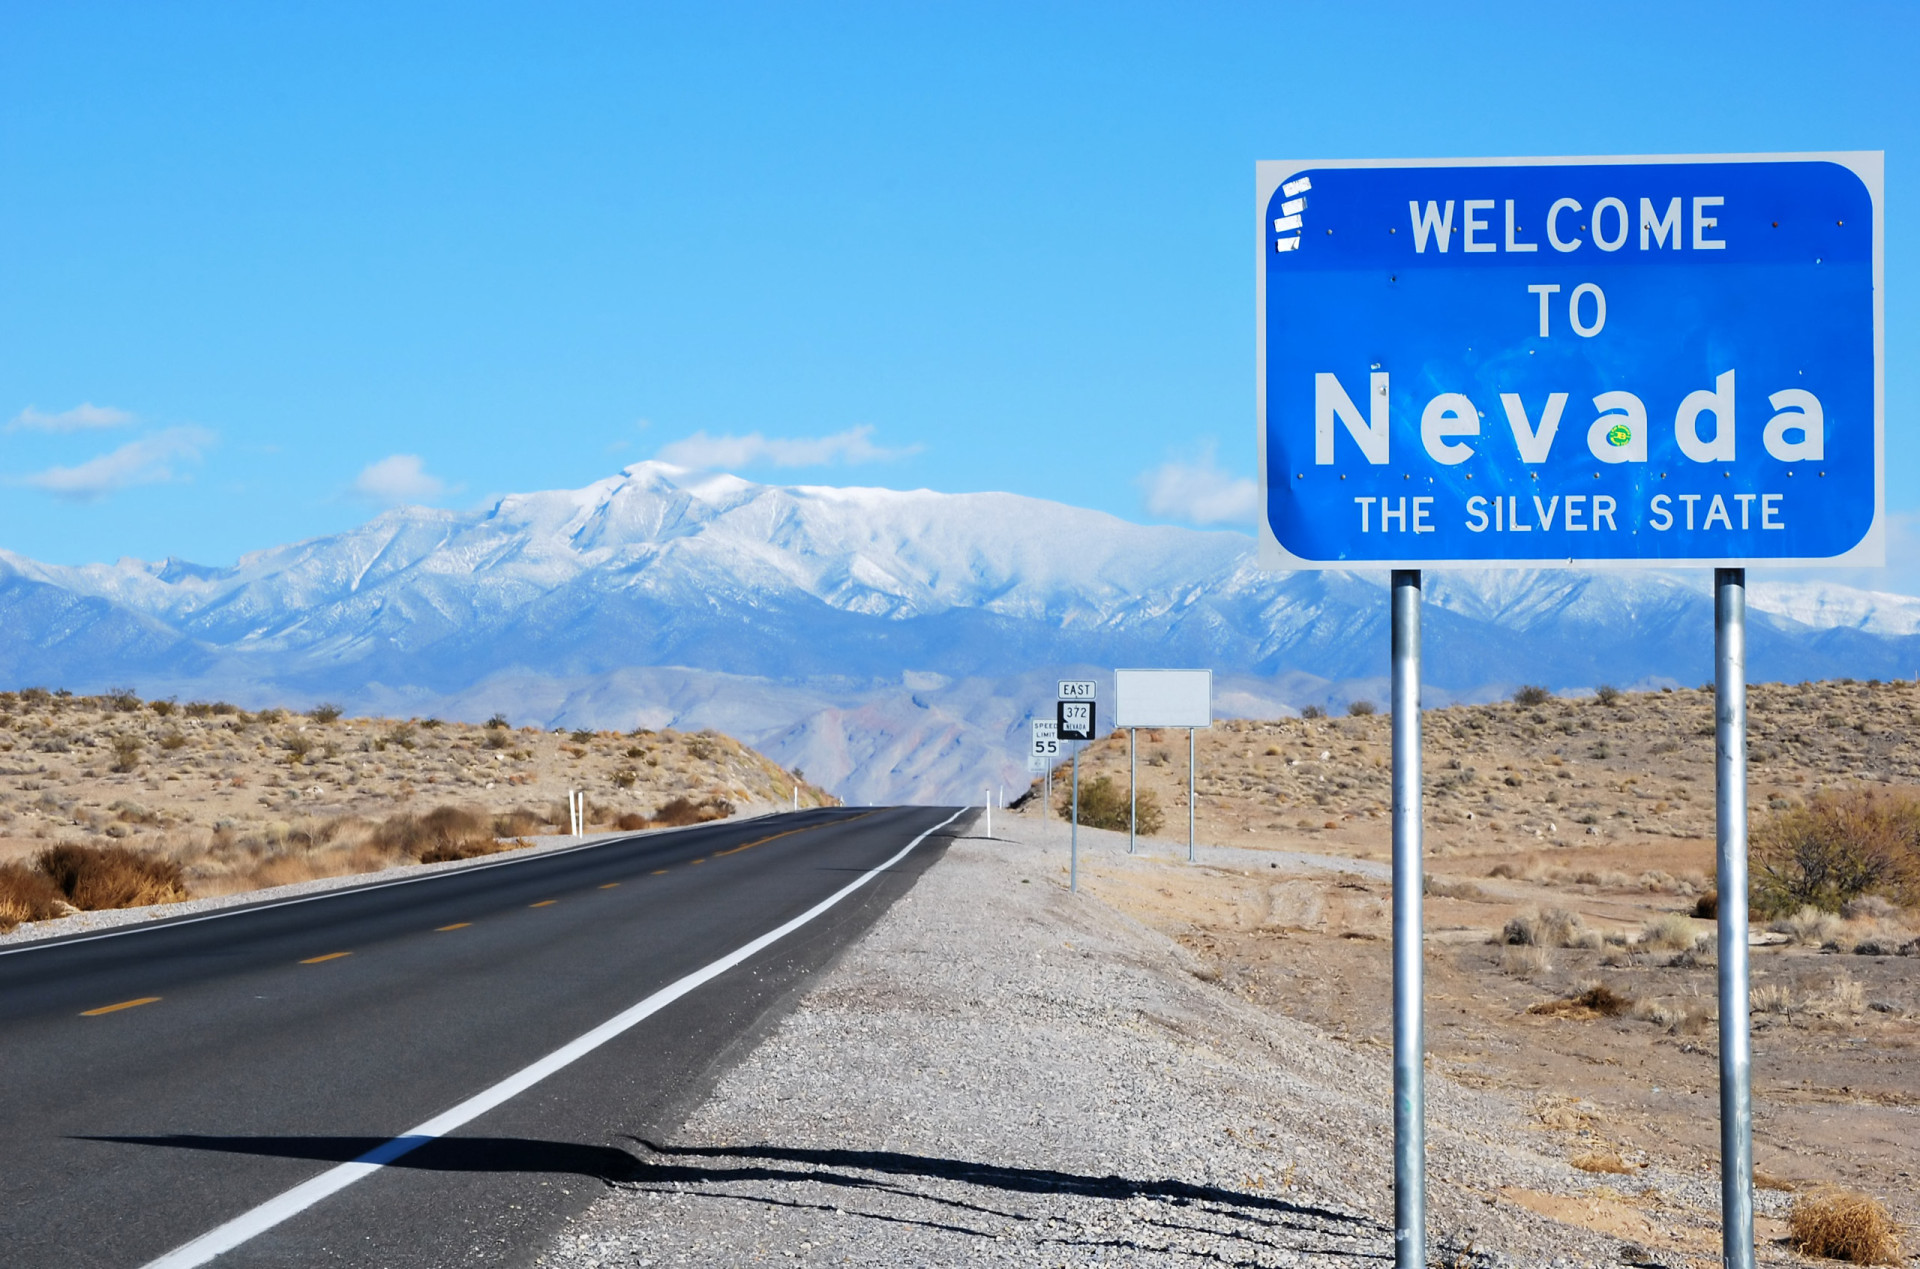 <p>The driest state in America is also the Silver State. A reference to the historical silver rush days features on the state welcome sign. </p><p>You may also like:<a href="https://www.starsinsider.com/n/493533?utm_source=msn.com&utm_medium=display&utm_campaign=referral_description&utm_content=572689en-en"> Celebrity kids who have dated other celebrity kids</a></p>